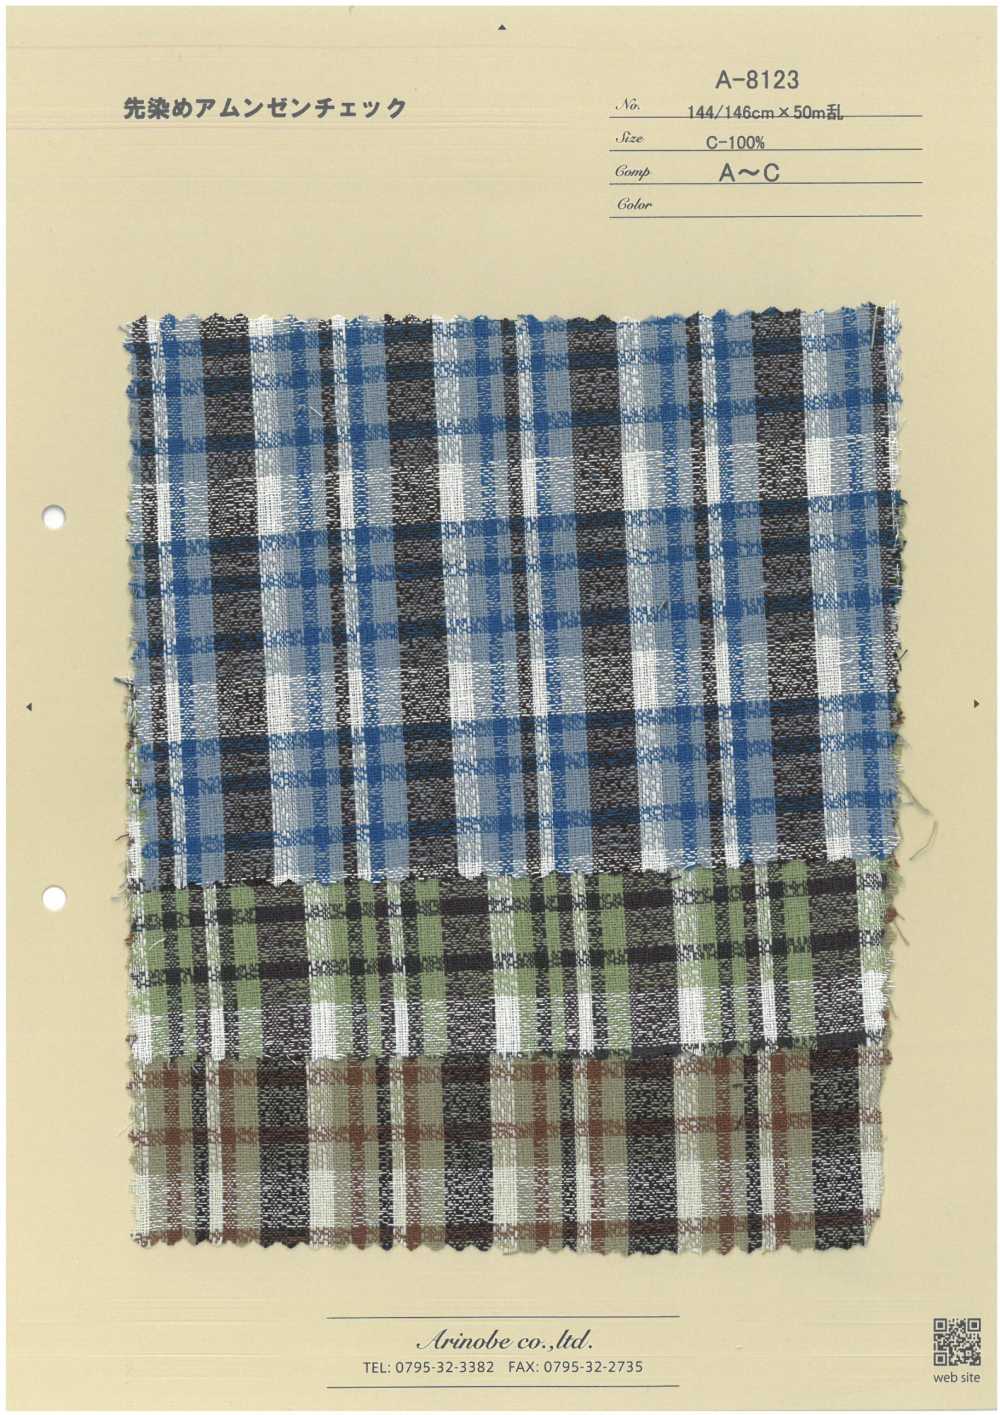 A-8123 Yarn Dyed Roughness Surface Check[Textile / Fabric] ARINOBE CO., LTD.